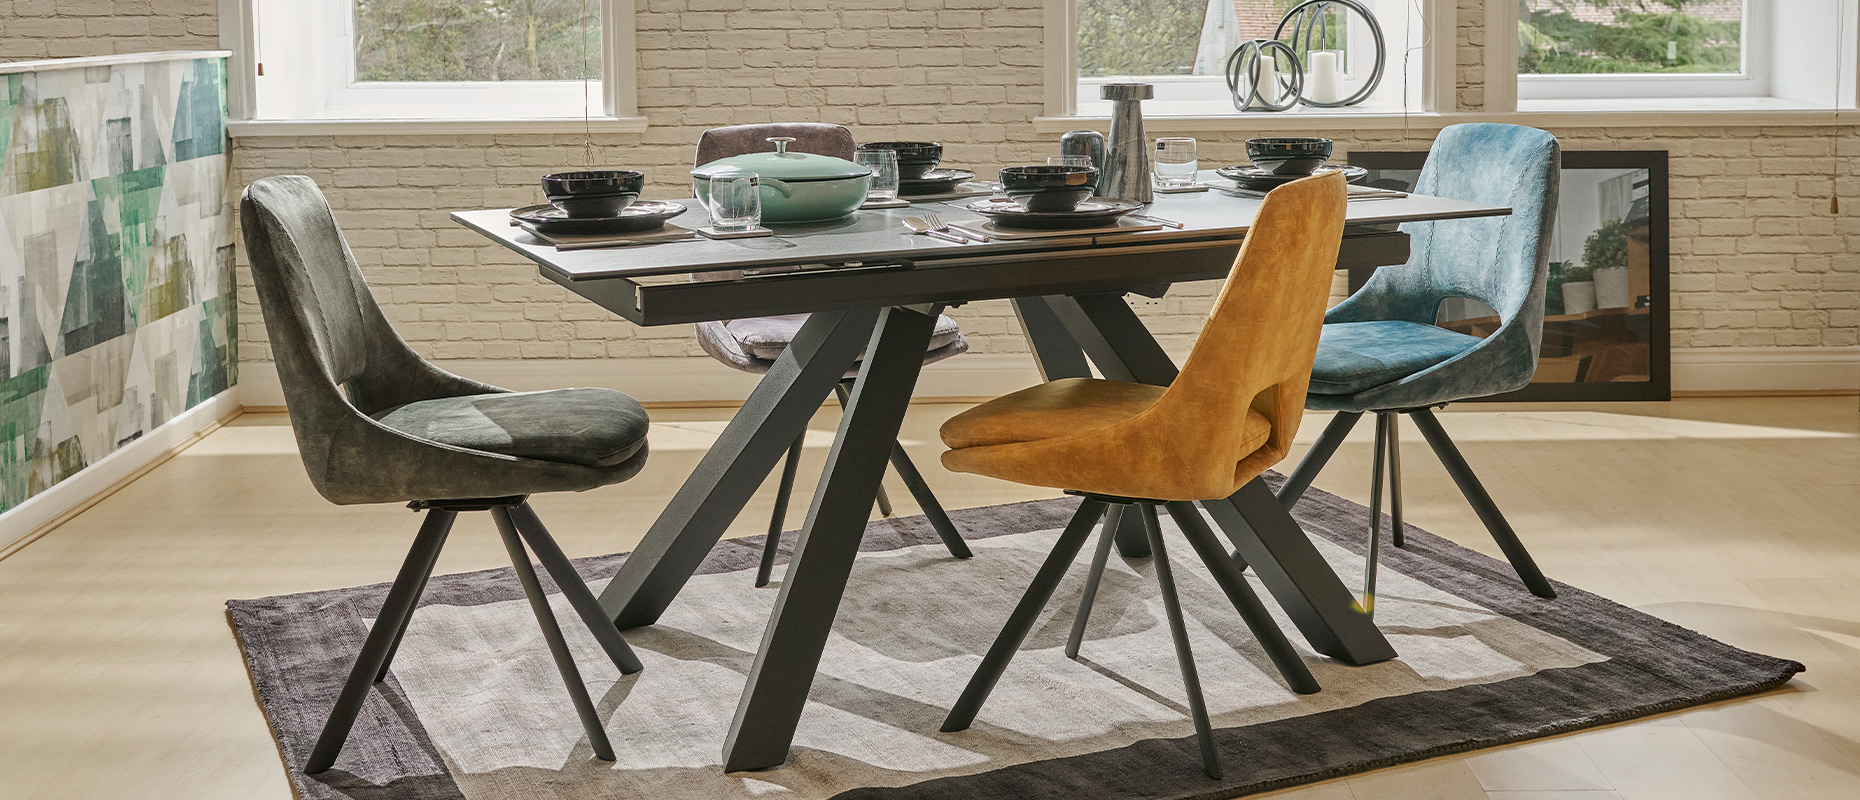 Brax dining collection at Forrest Furnishing